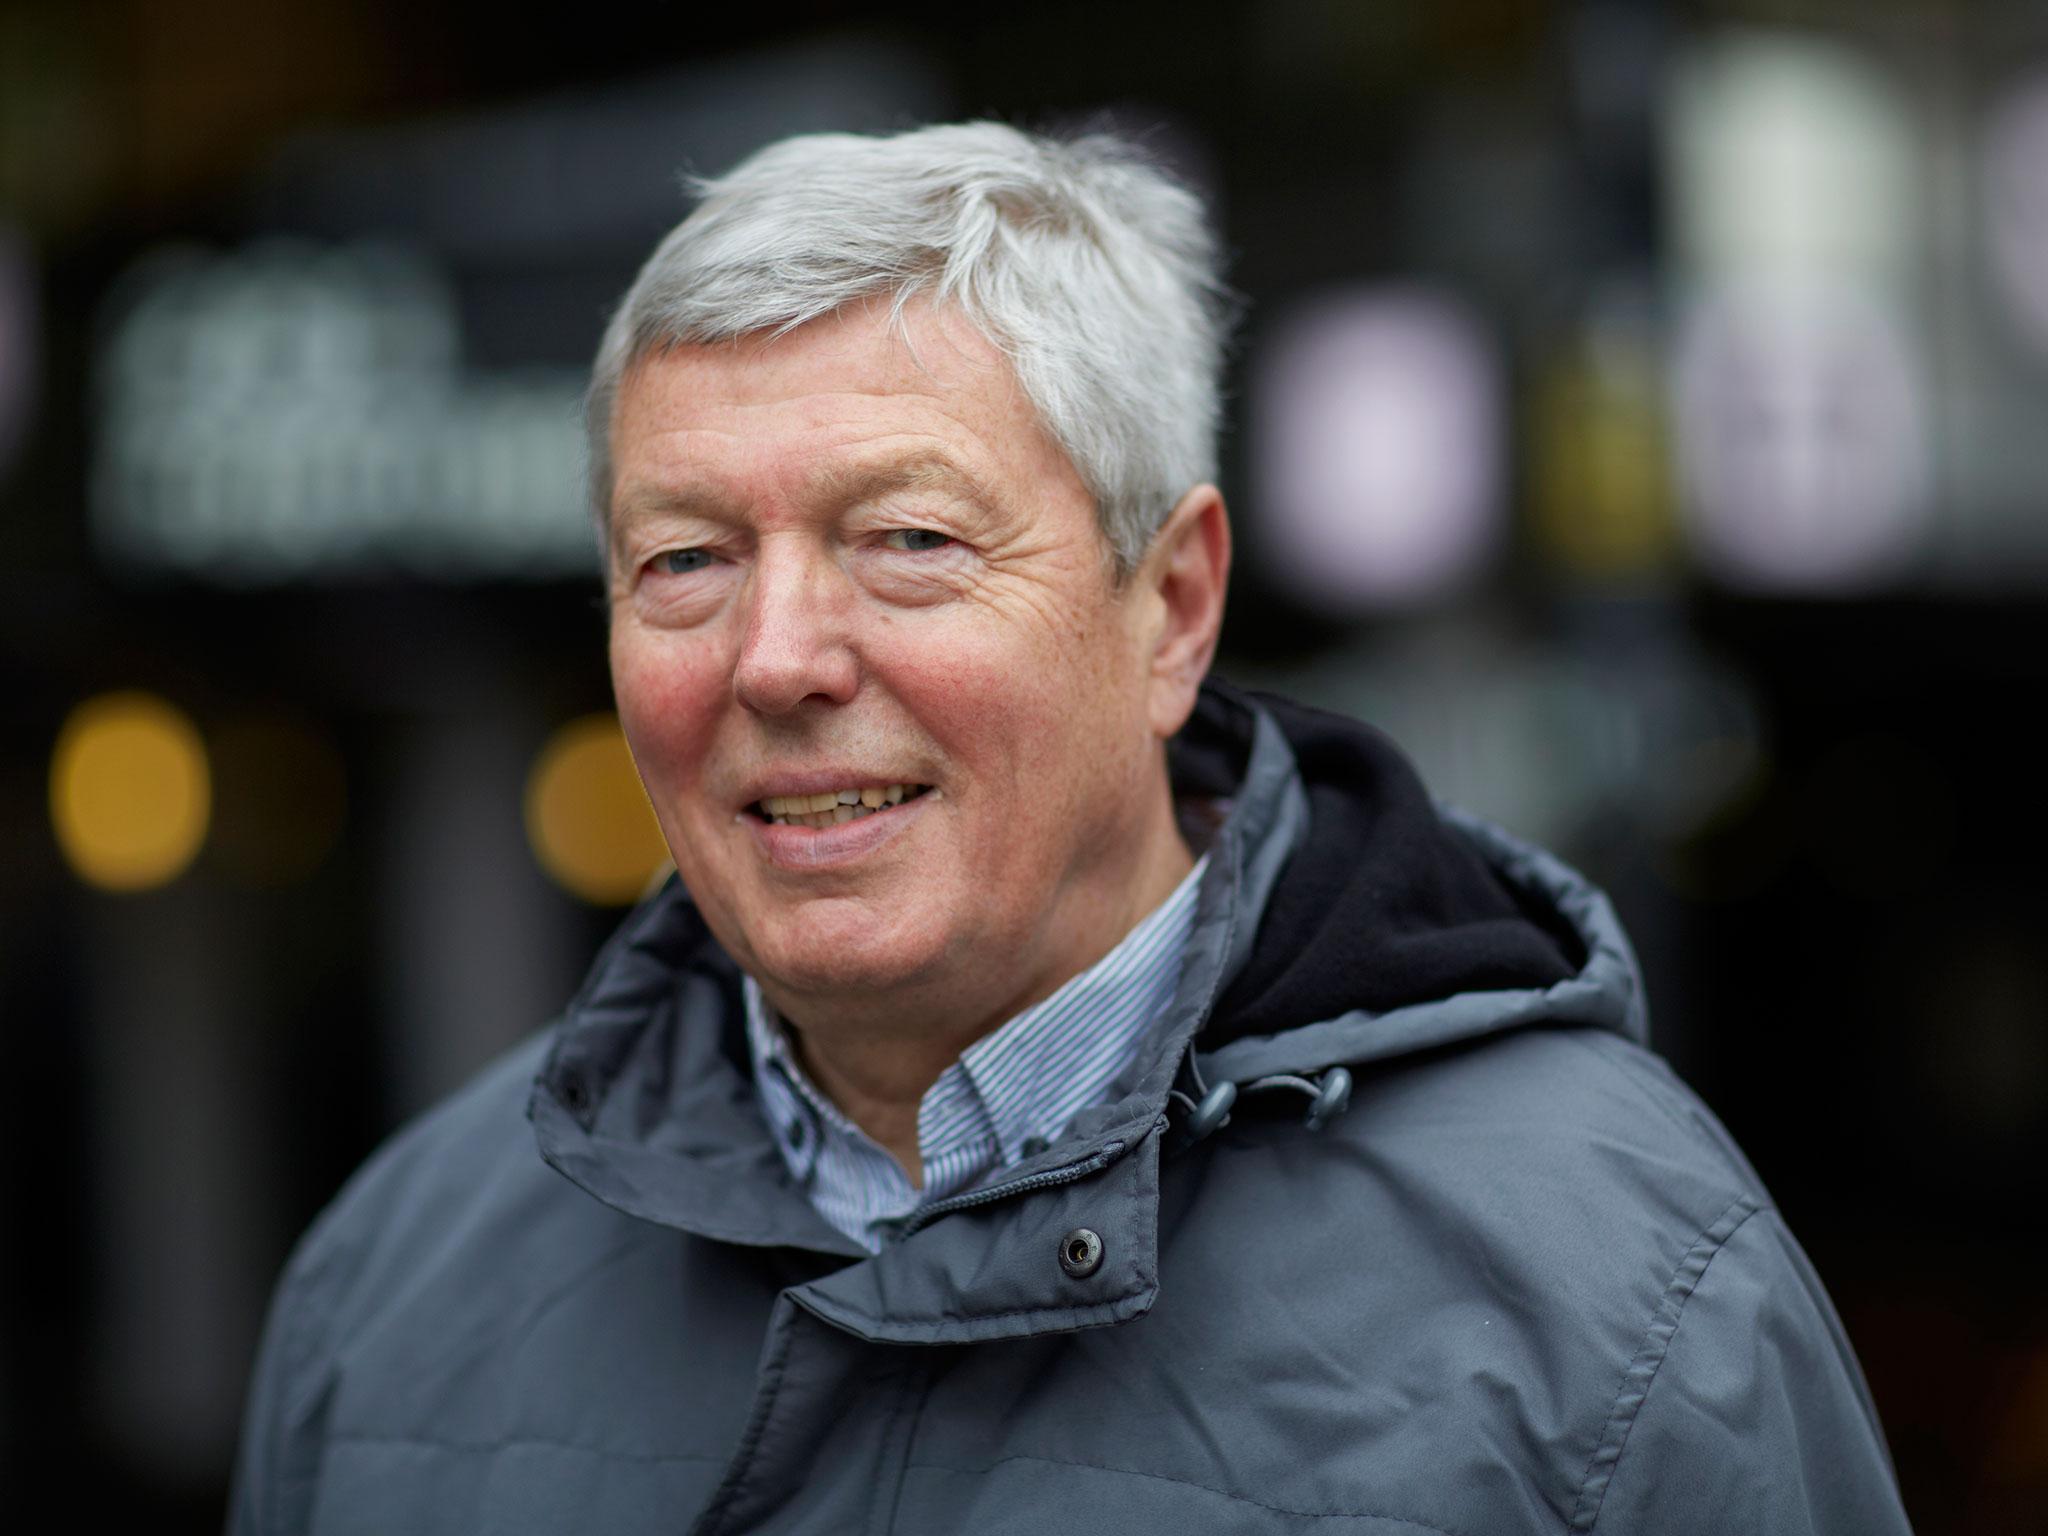 Alan Johnson said he had been surprised when Mr Miliband offered him the post of shadow chancellor after becoming leader in 2010